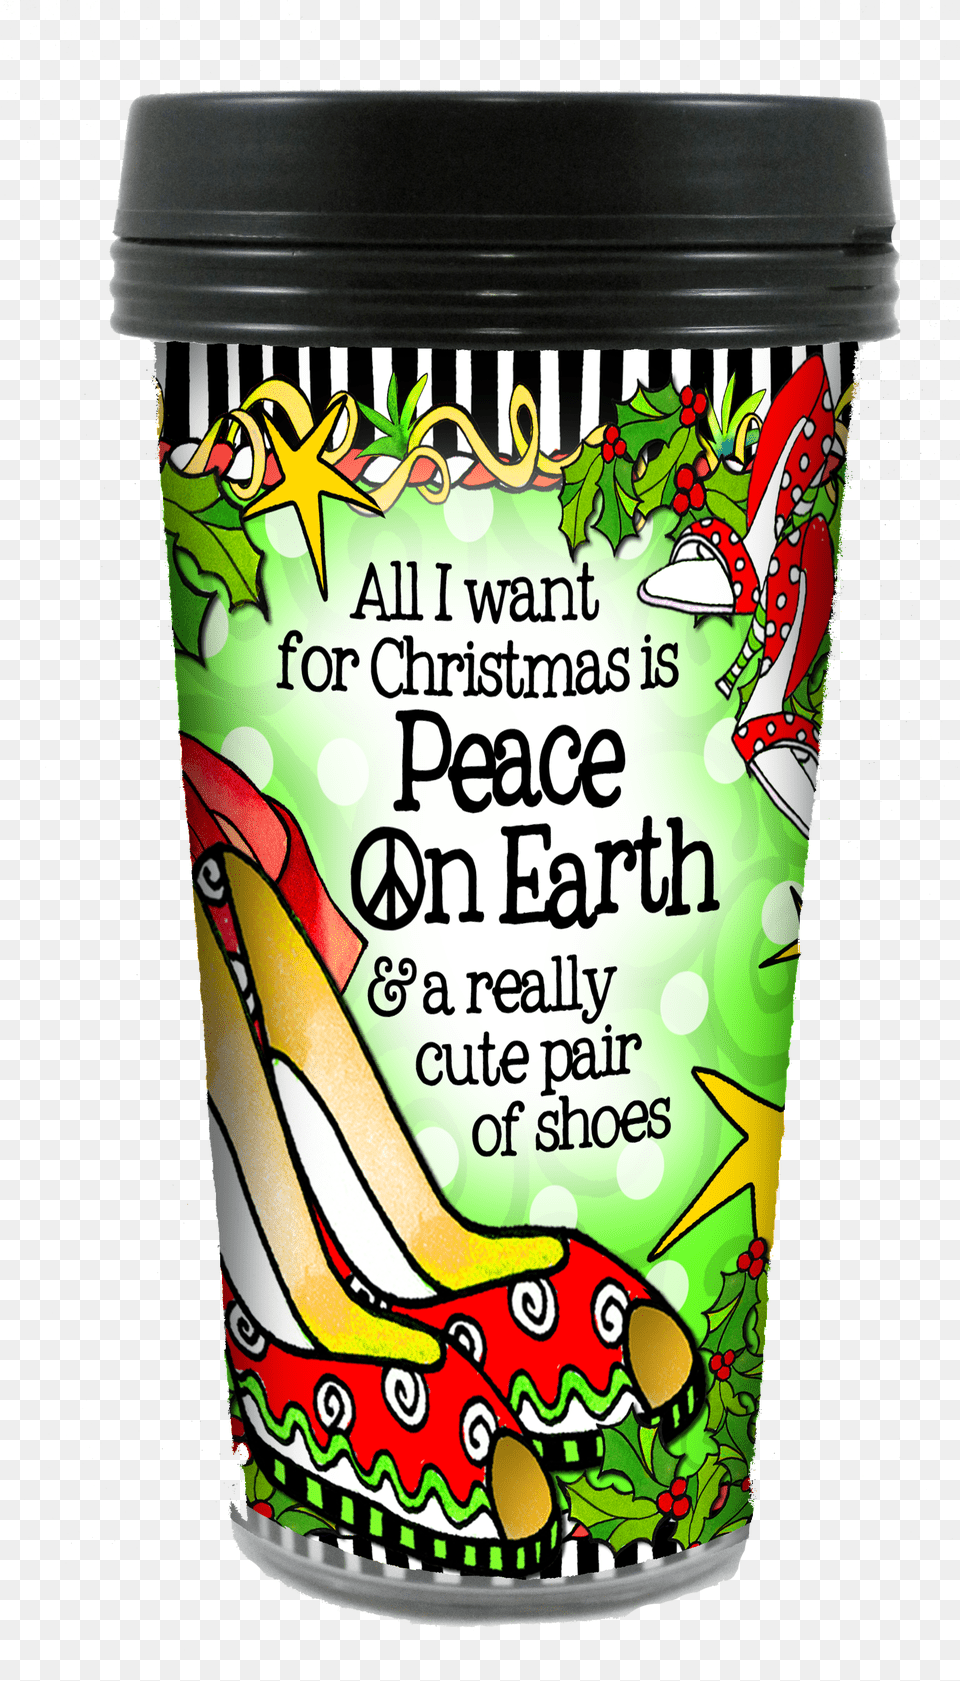 All I Want For Christmas Is Peace On Earth Amp A Really Mug, Clothing, Footwear, Shoe, Sneaker Png Image